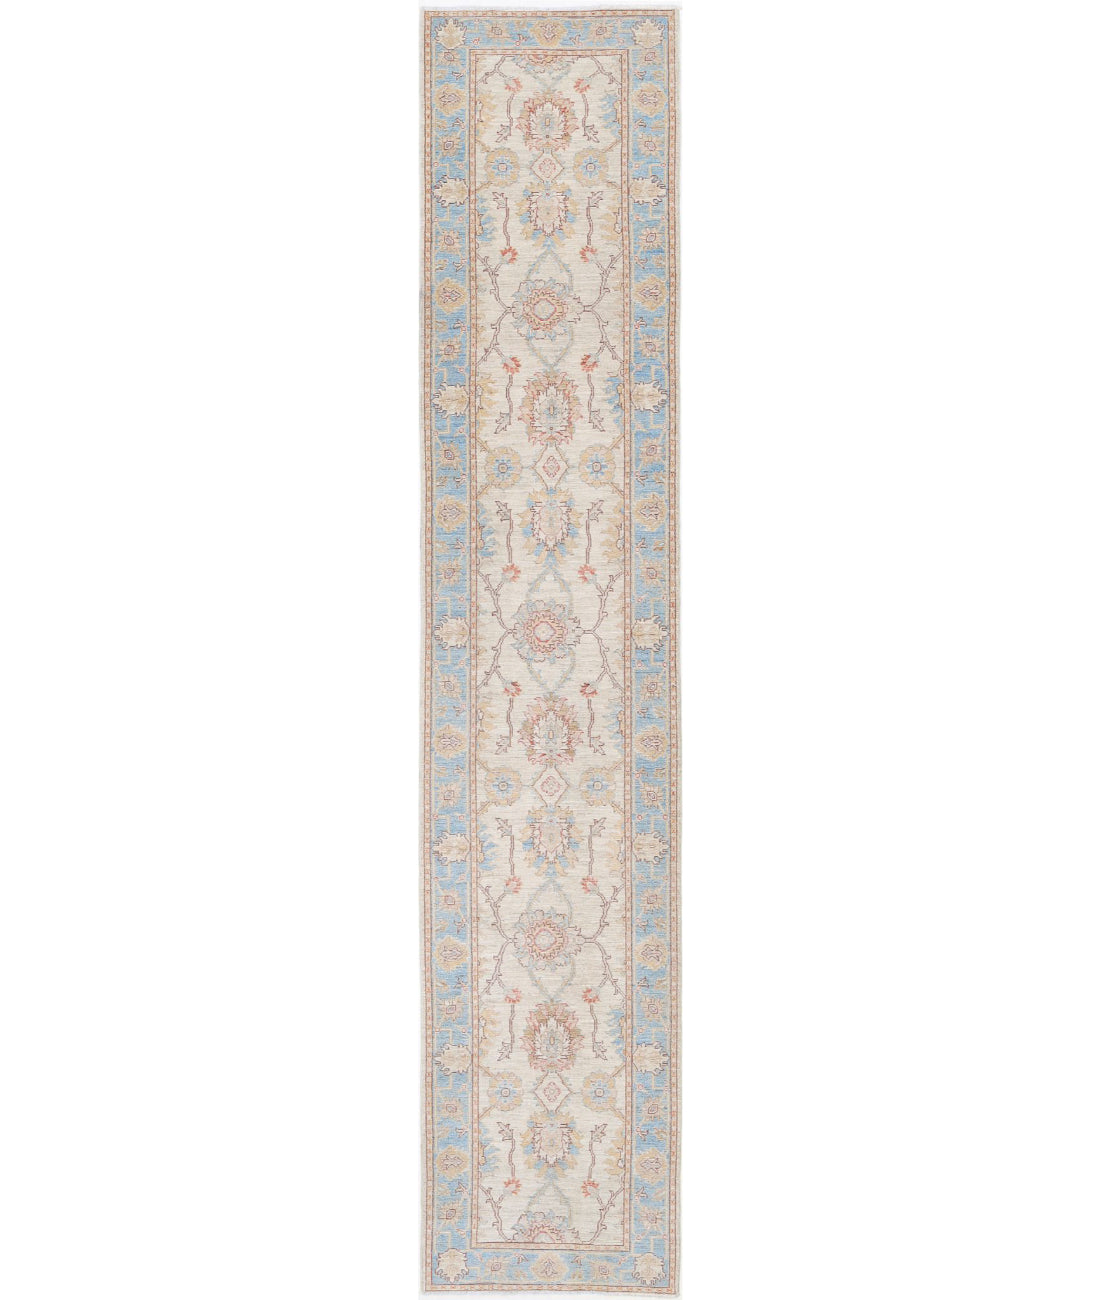 Hand Knotted Serenity Wool Rug - 3'1'' x 15'9'' 3'1'' x 15'9'' (93 X 473) / Ivory / Blue